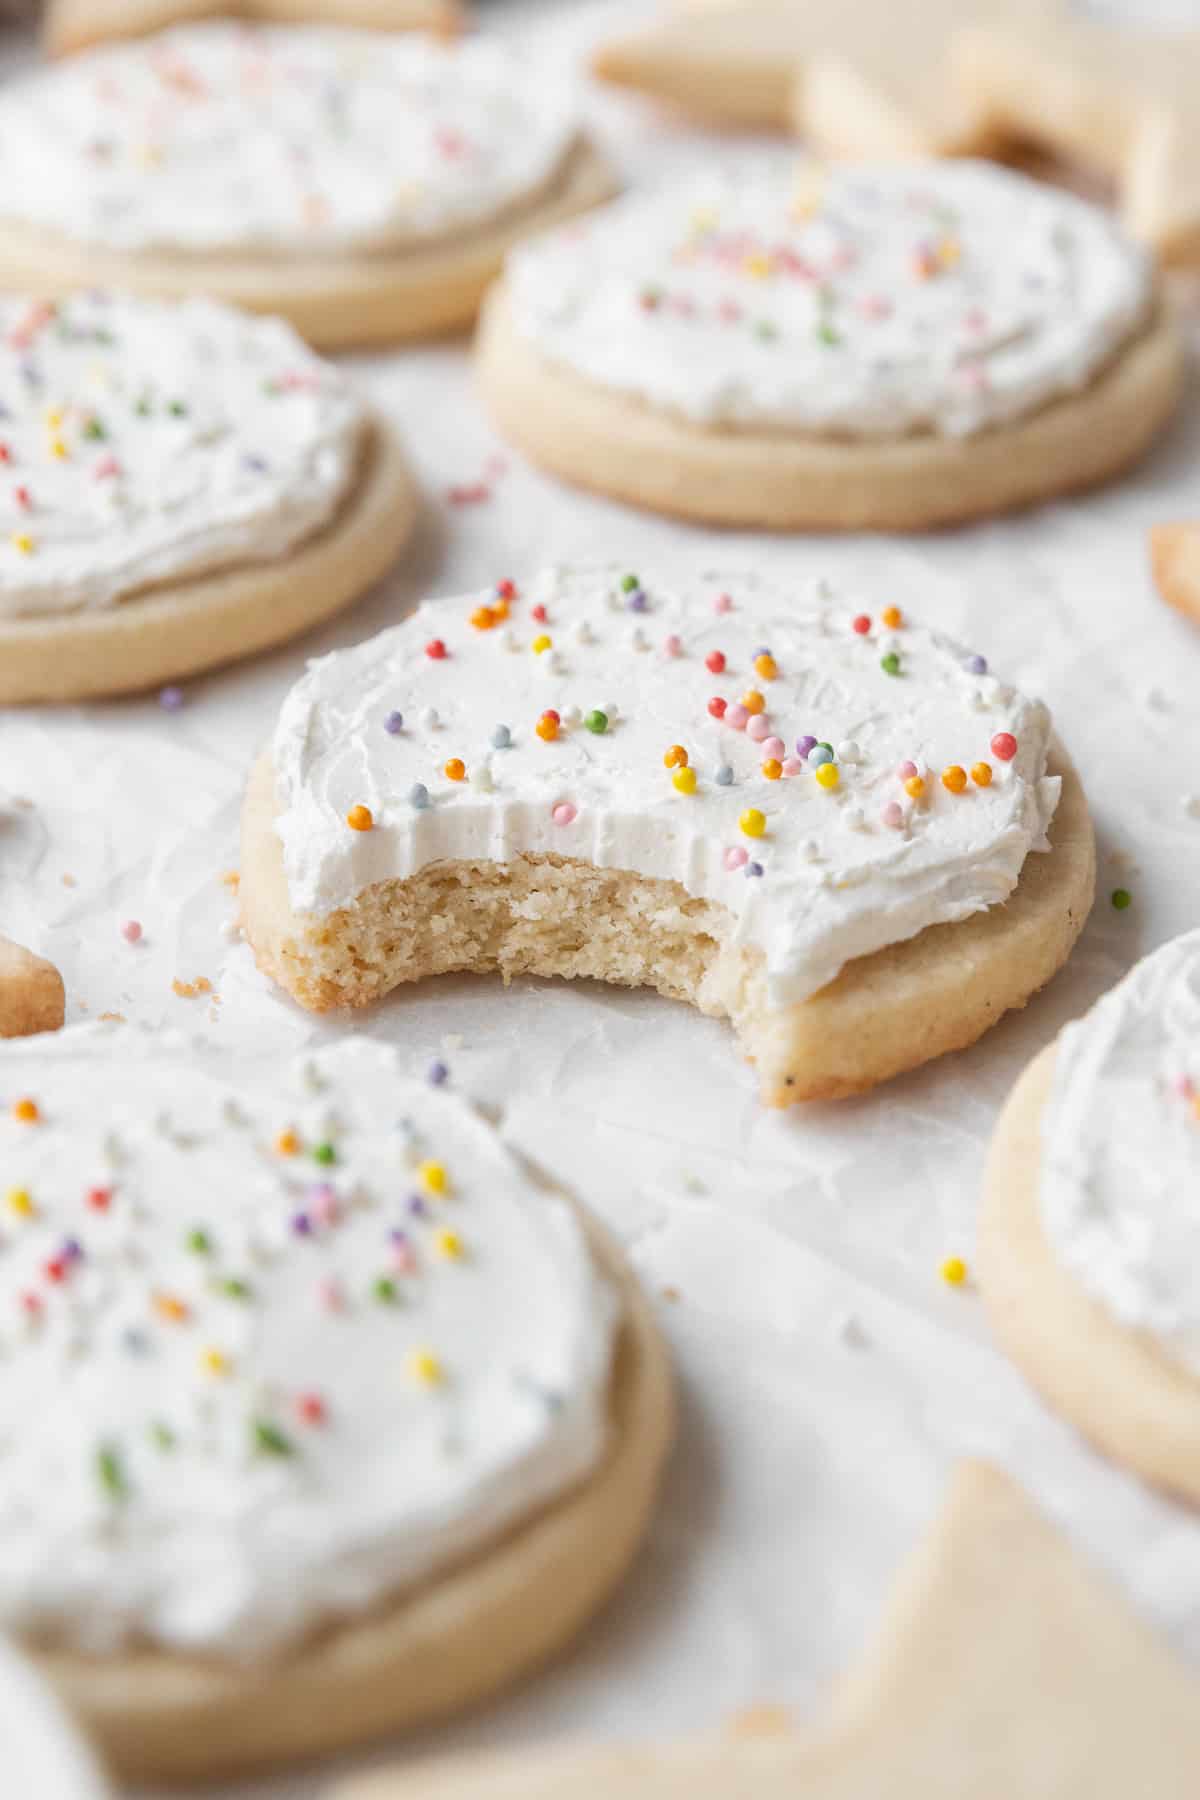 A bitten frosted gluten-free sugar cookie with sprinkles surrounded by more cookies.